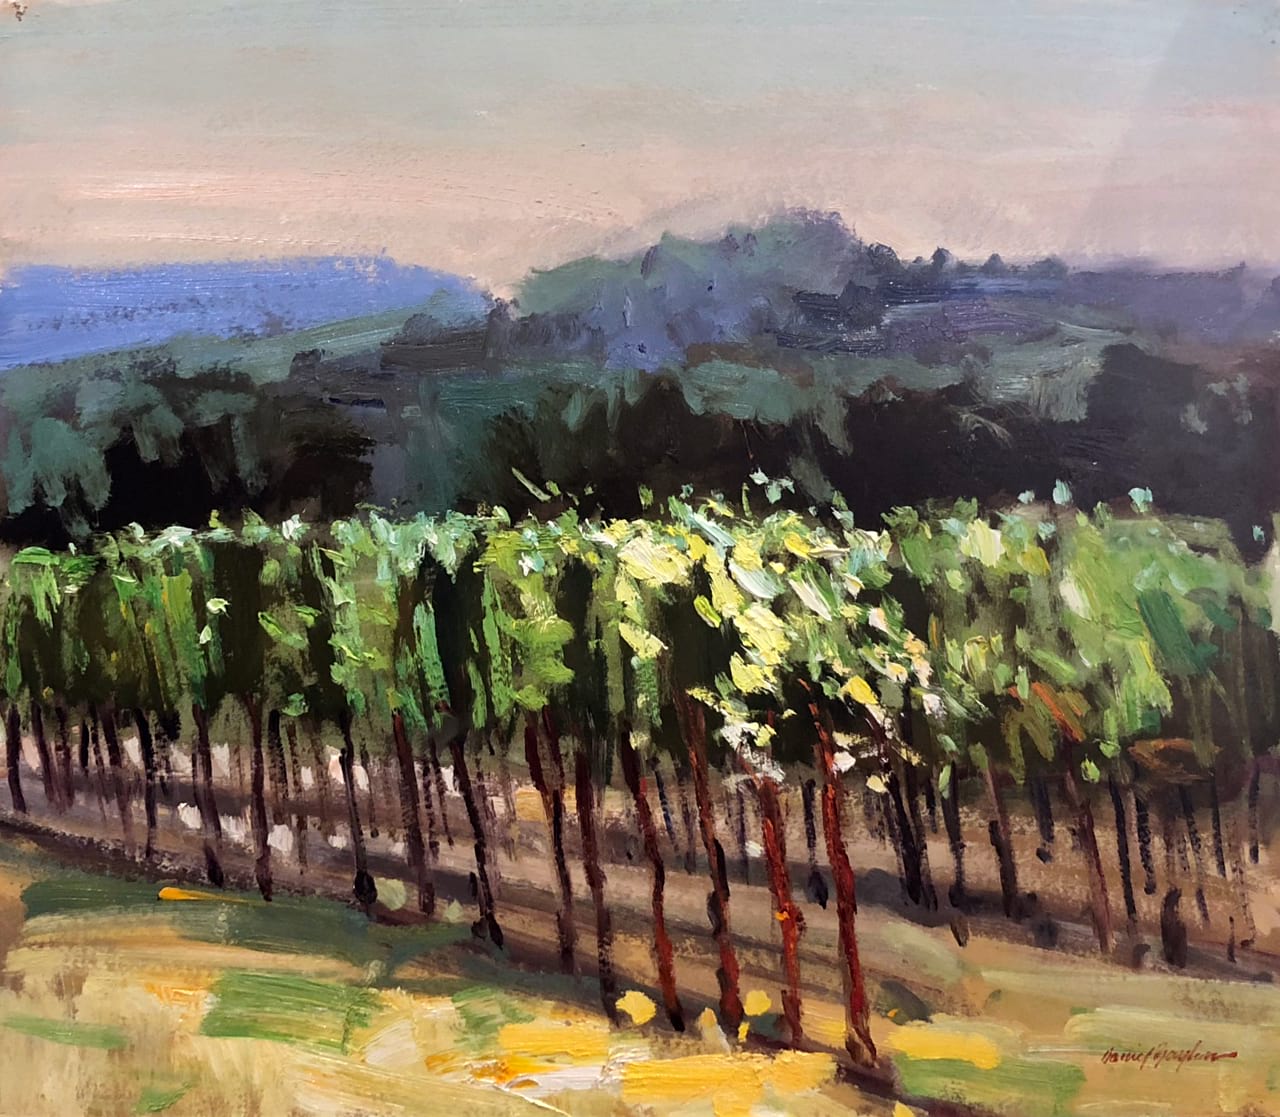 Oil on paper painting of trees planted in a row at dusk by Daniel Bayless